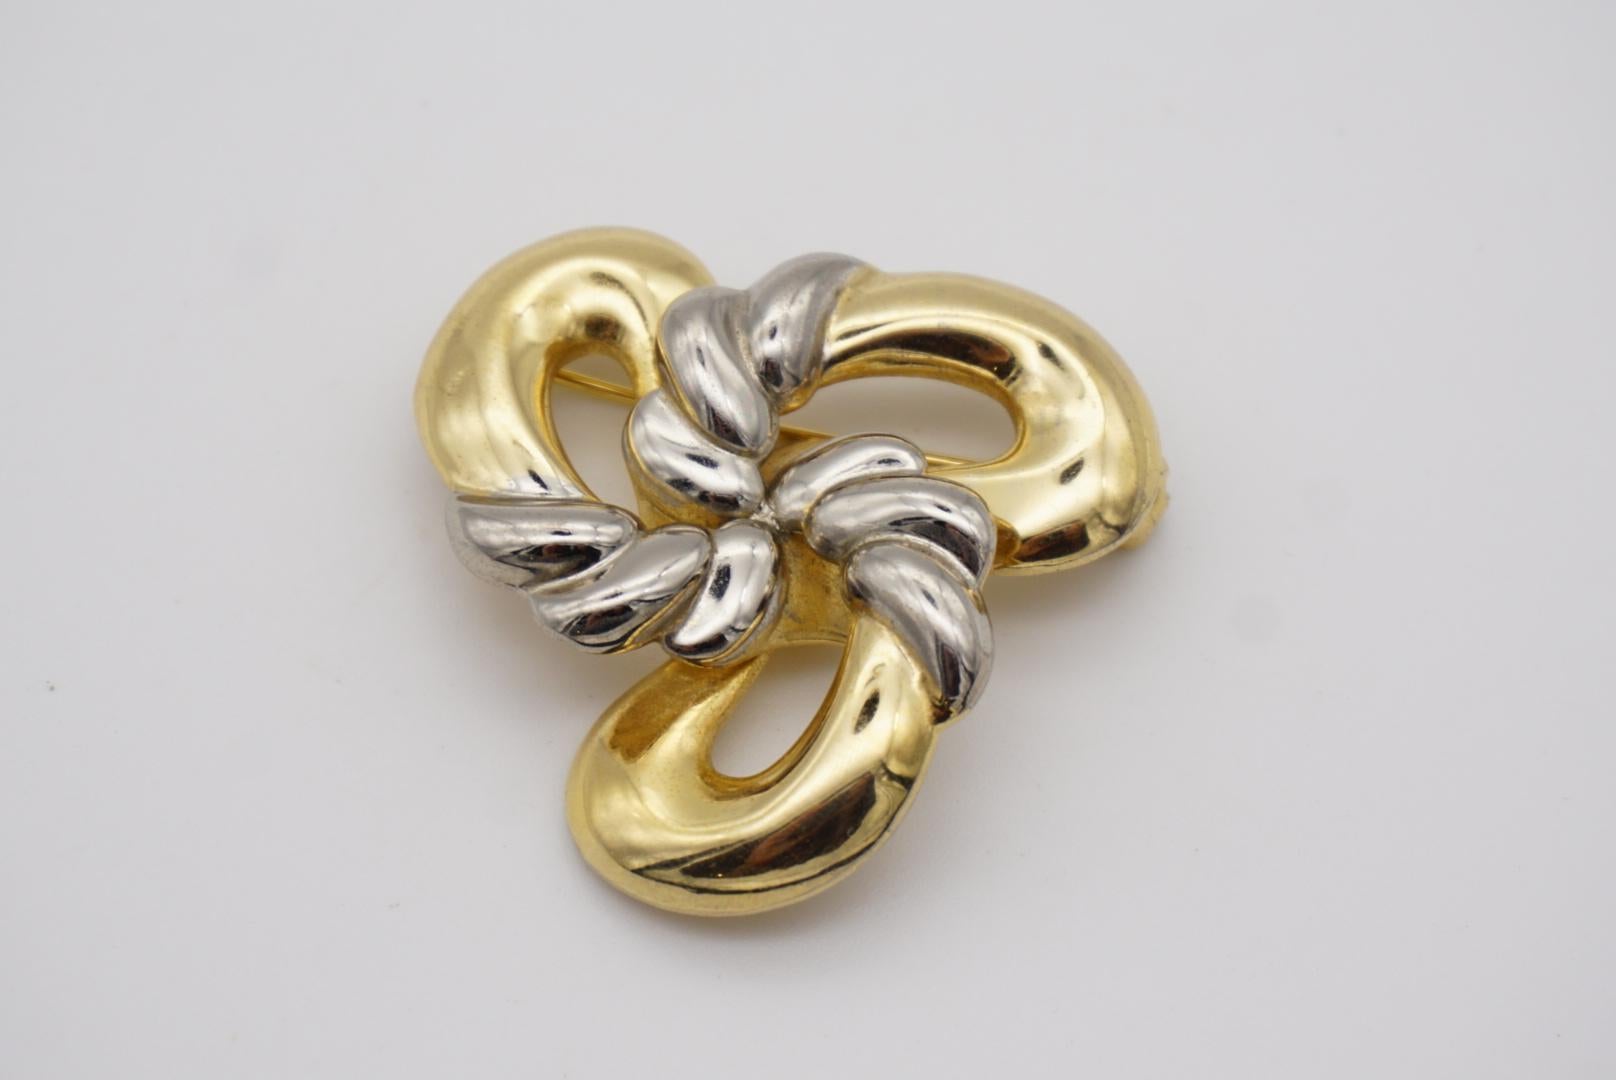 Christian Dior GROSSE 1969 Vintage Trio Knot Bows Swirl Twist Gold Silver Brooch For Sale 3